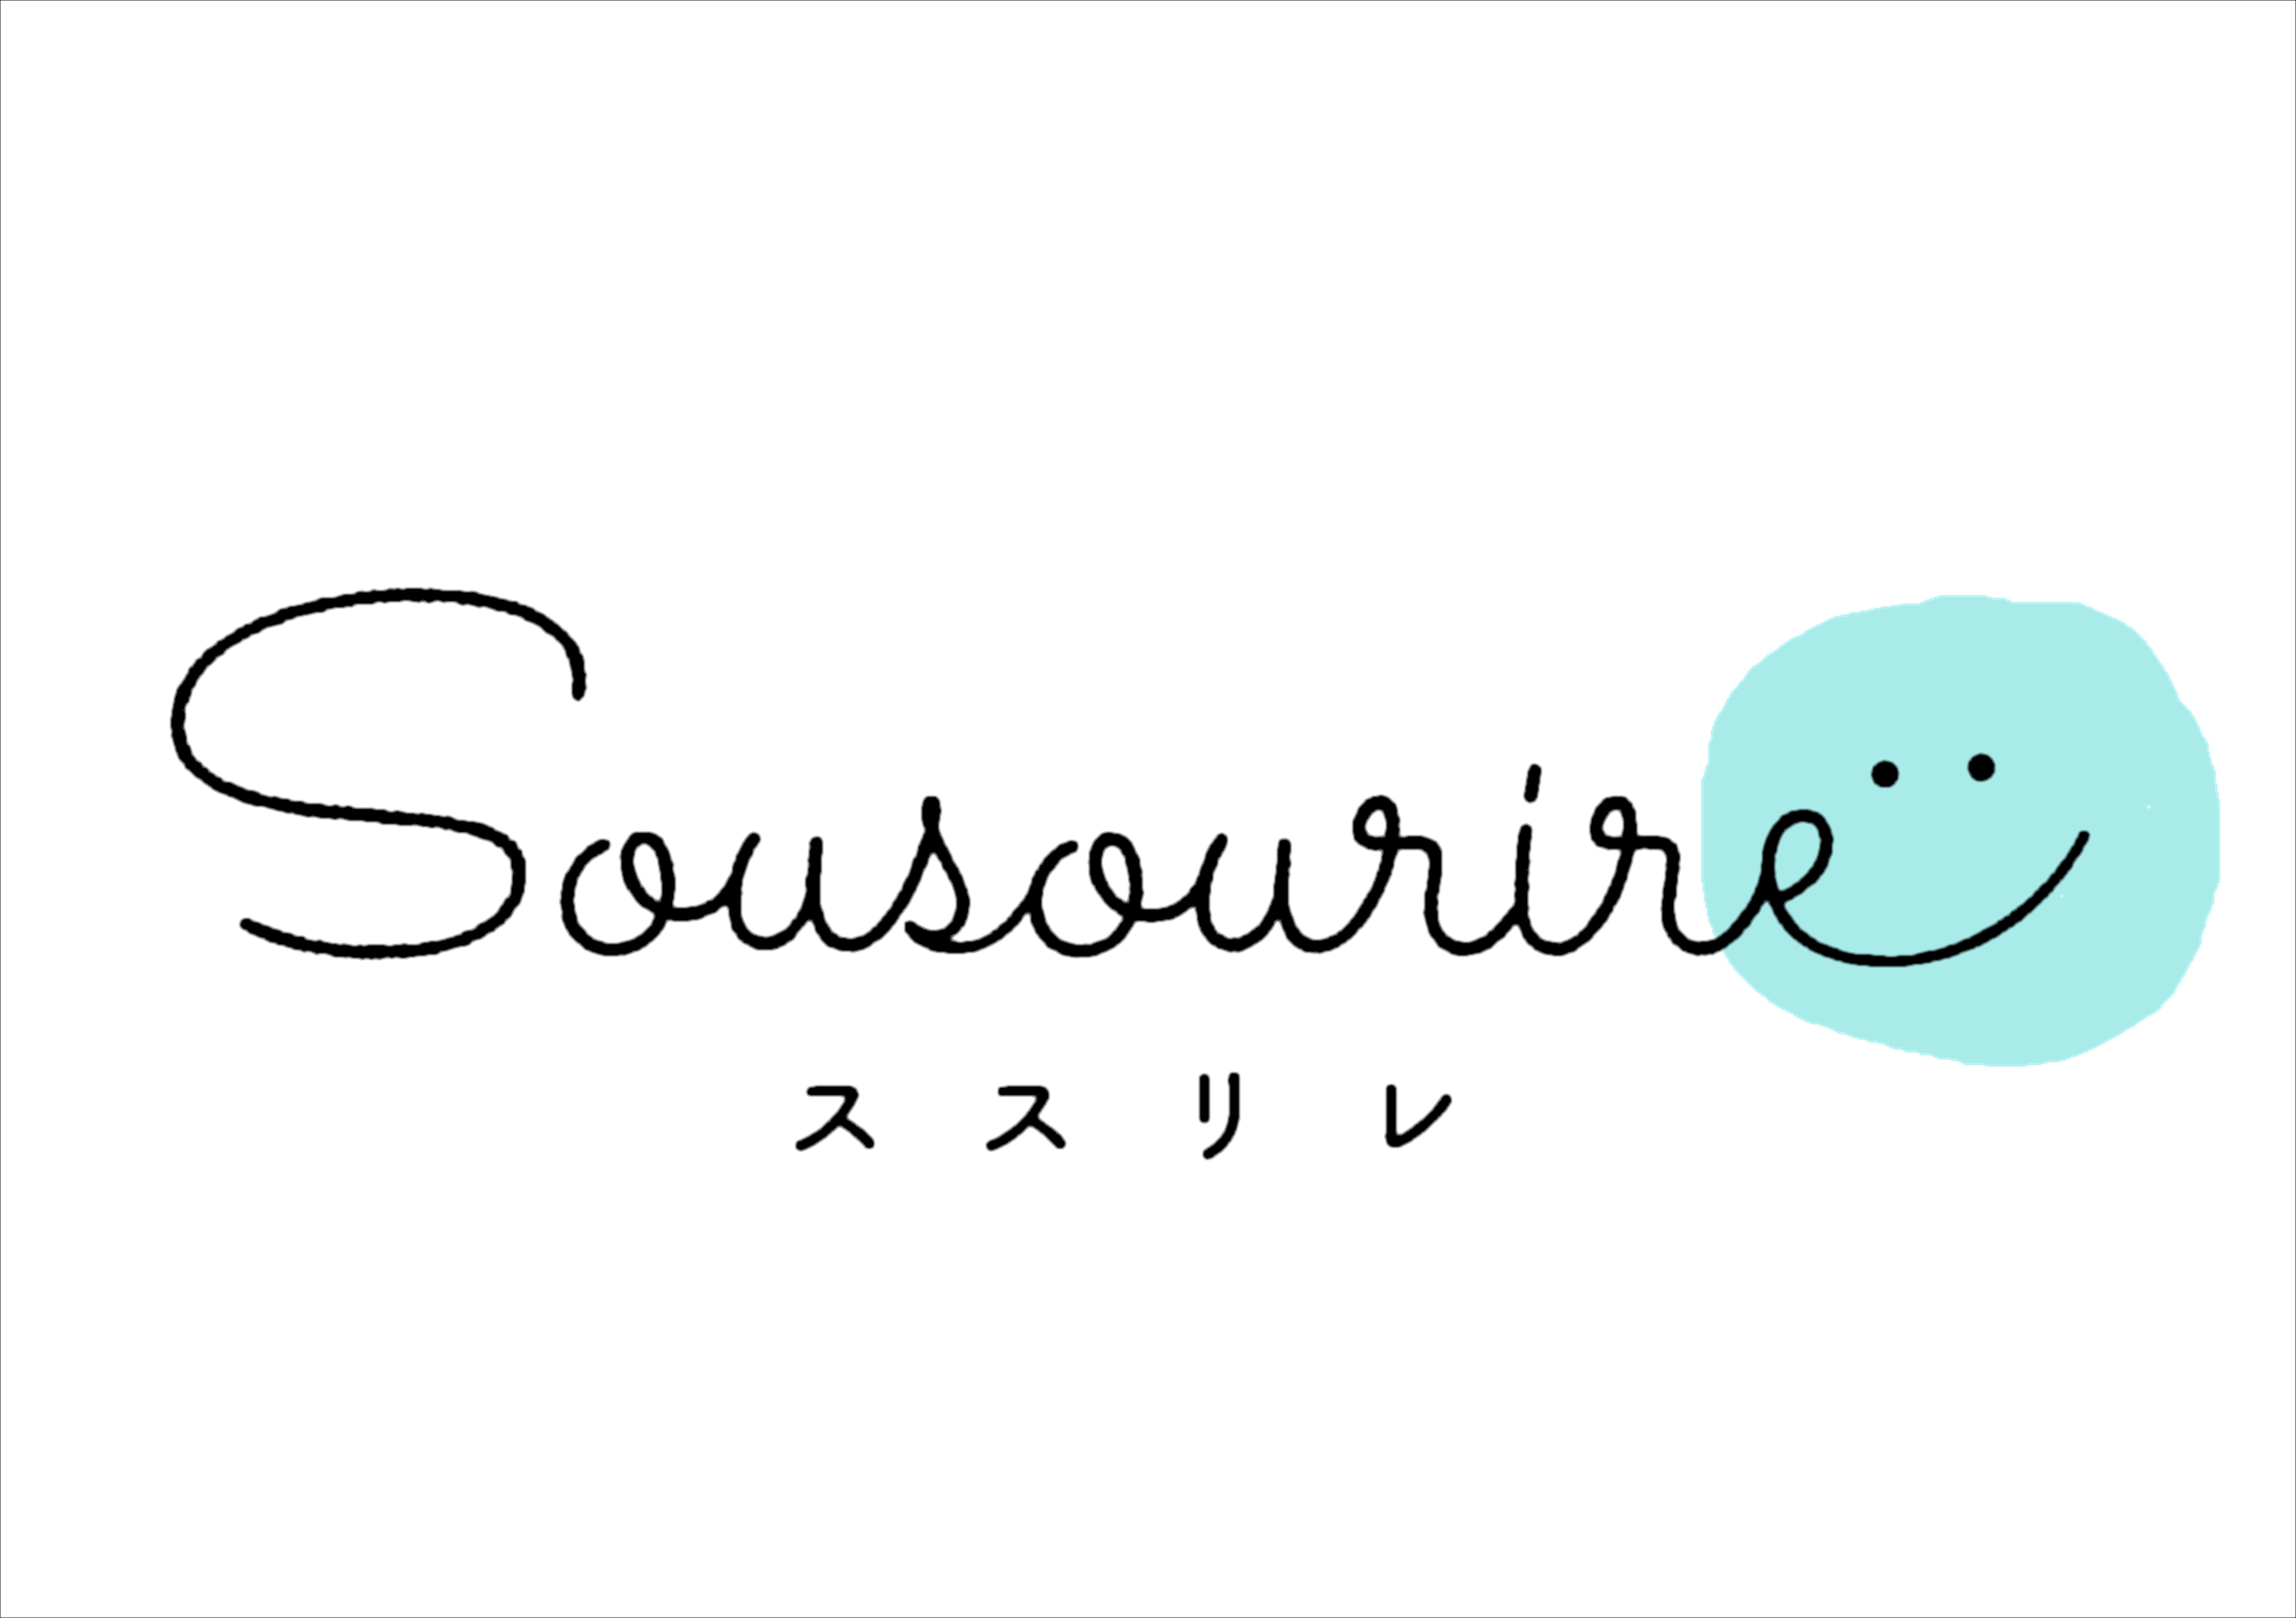 sousourire　ススリレ